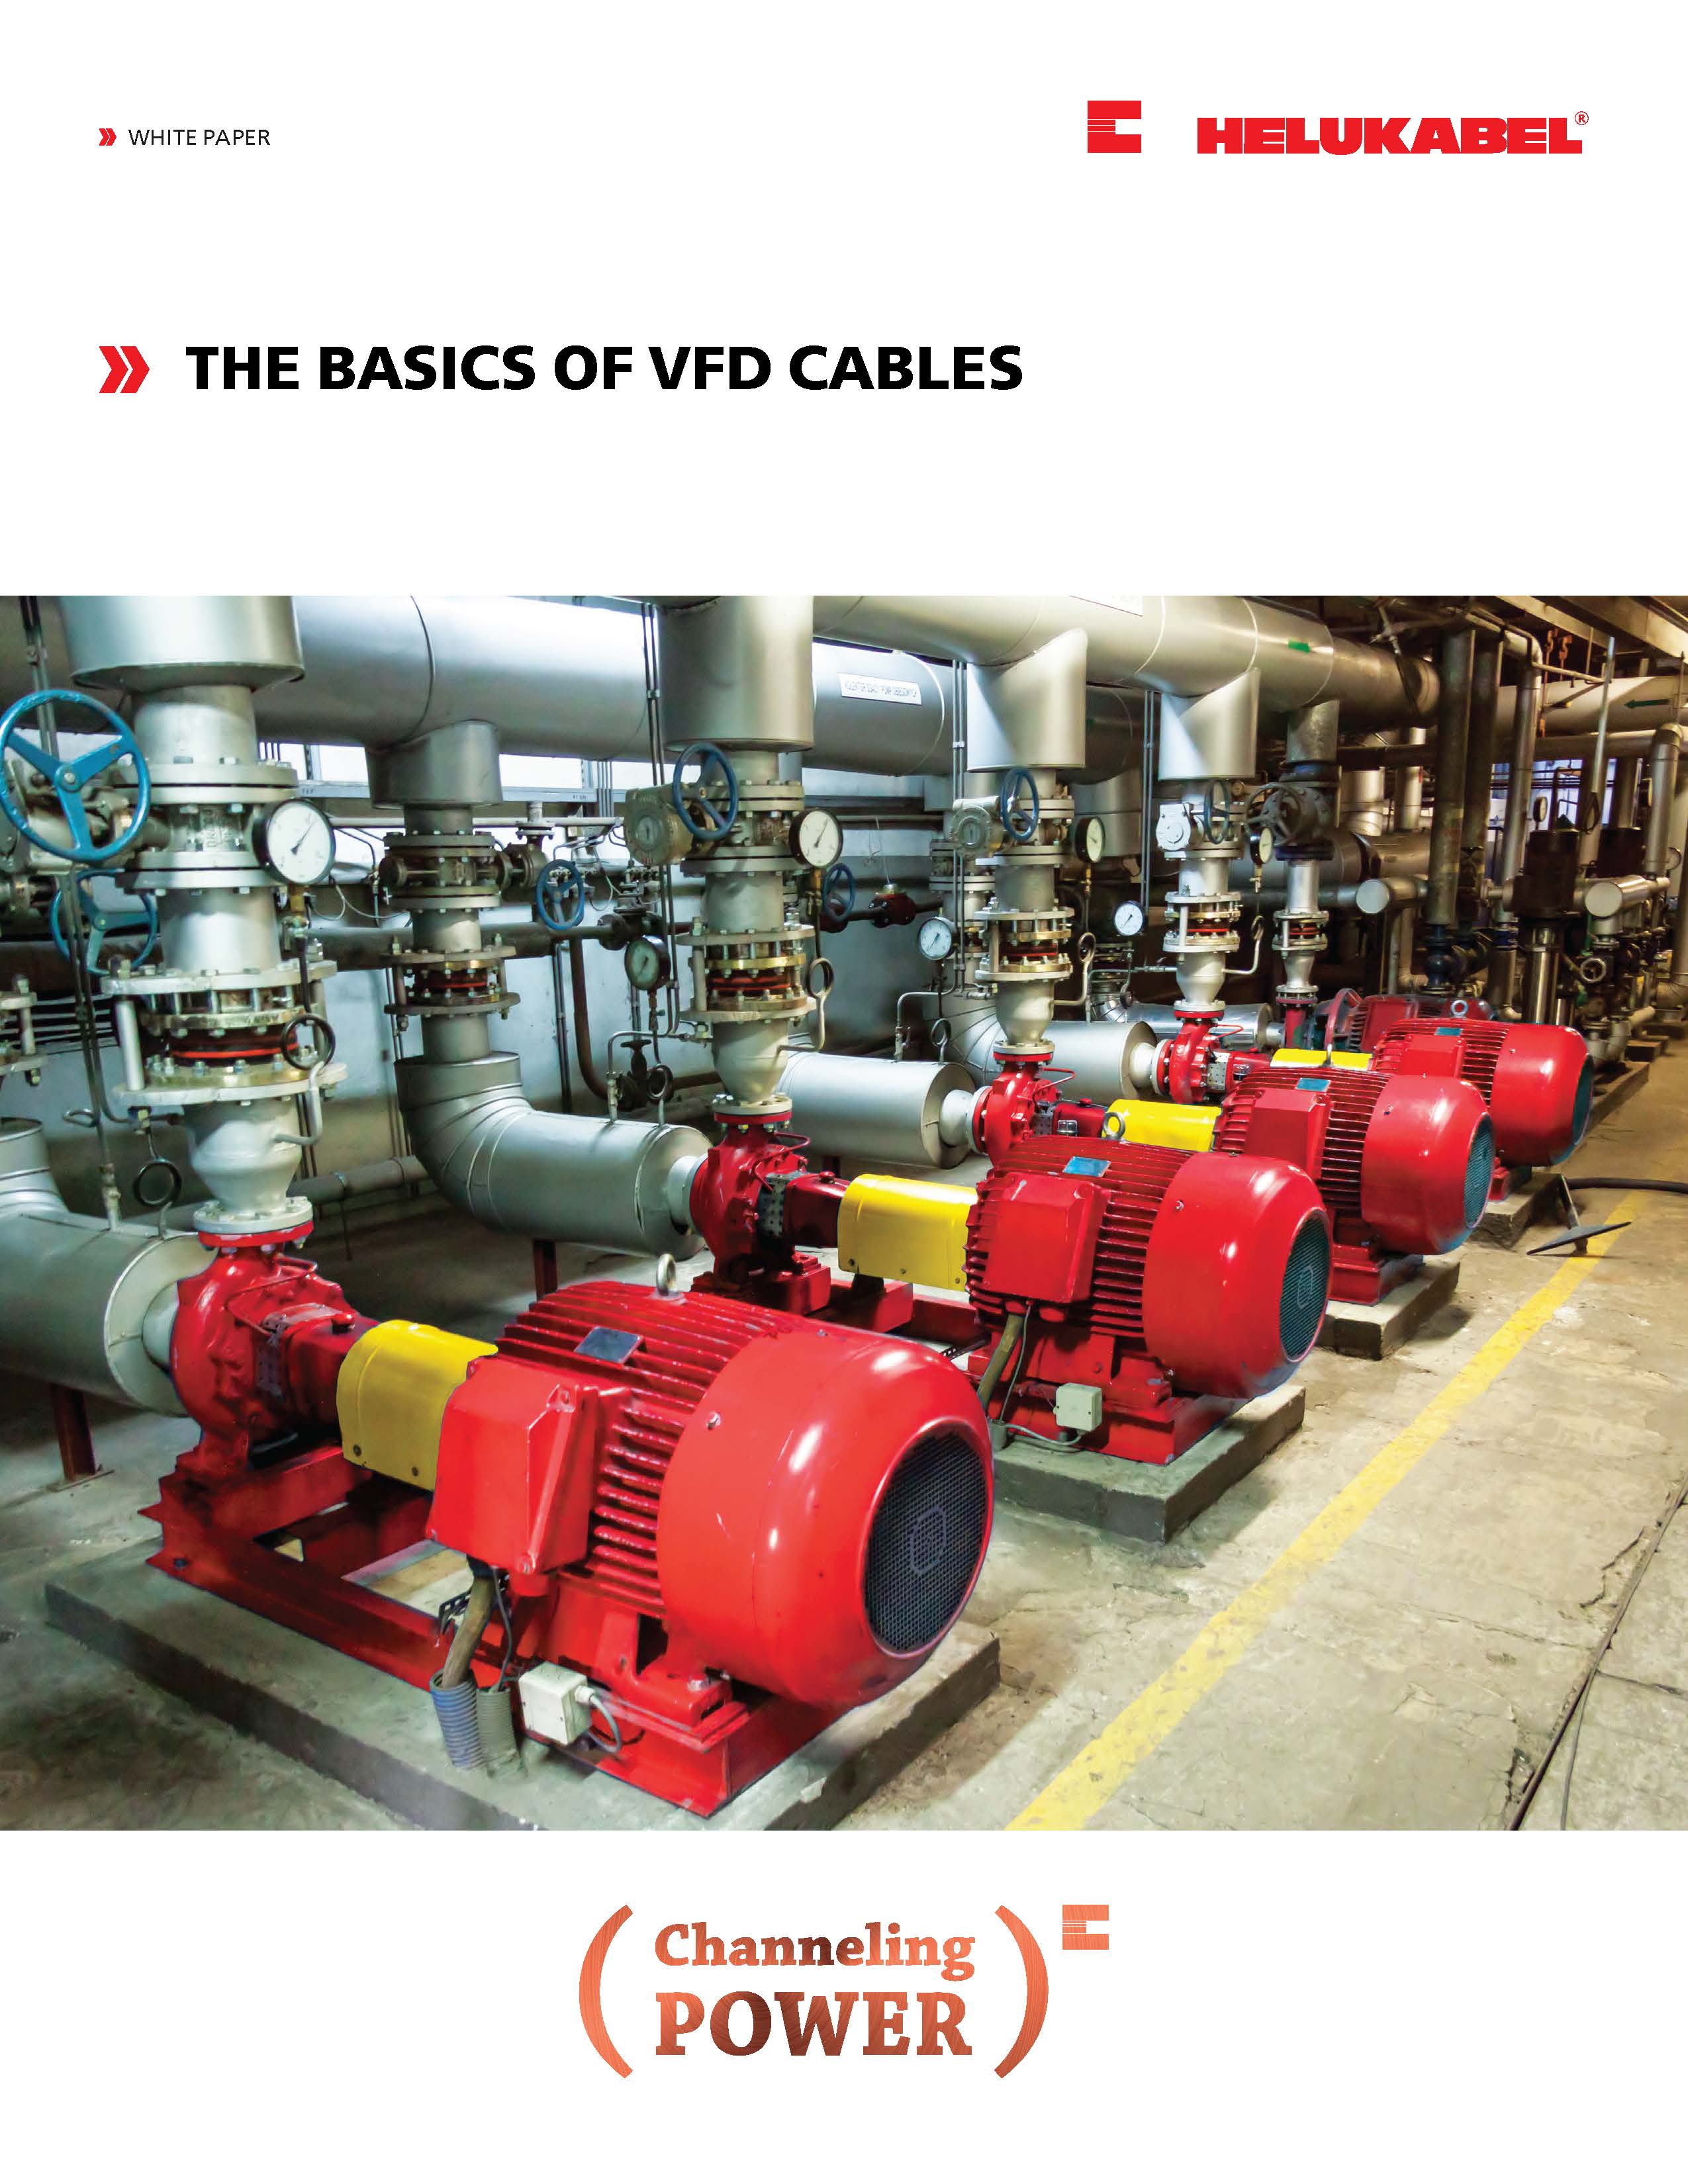 The Basics of VFD Cables